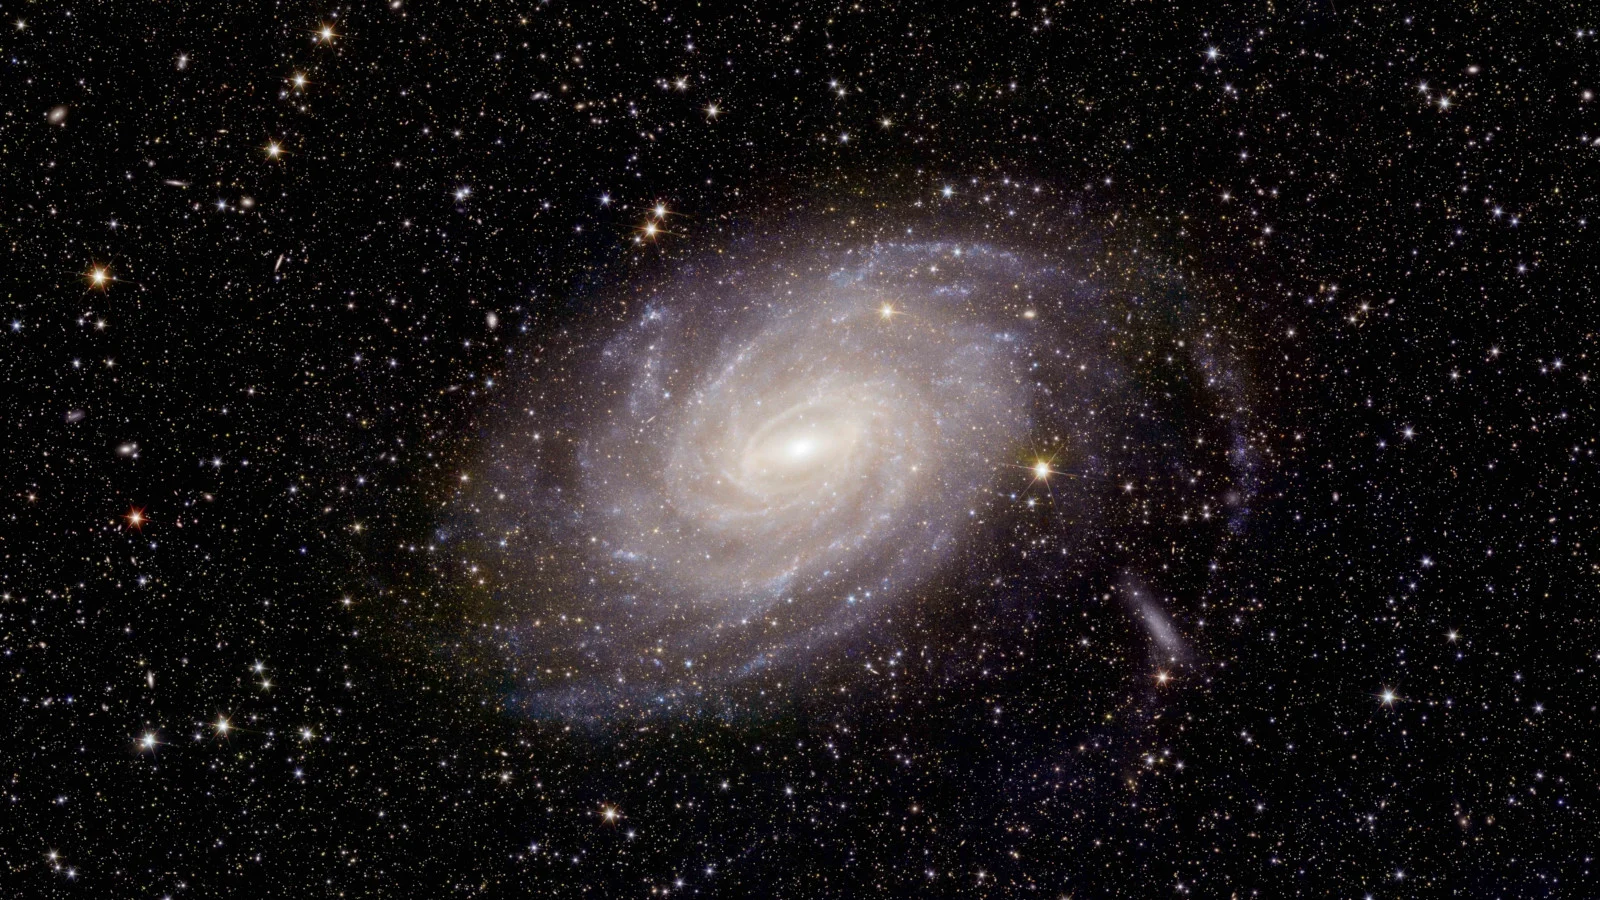 Euclid s new image of spiral galaxy NGC 6744 crop